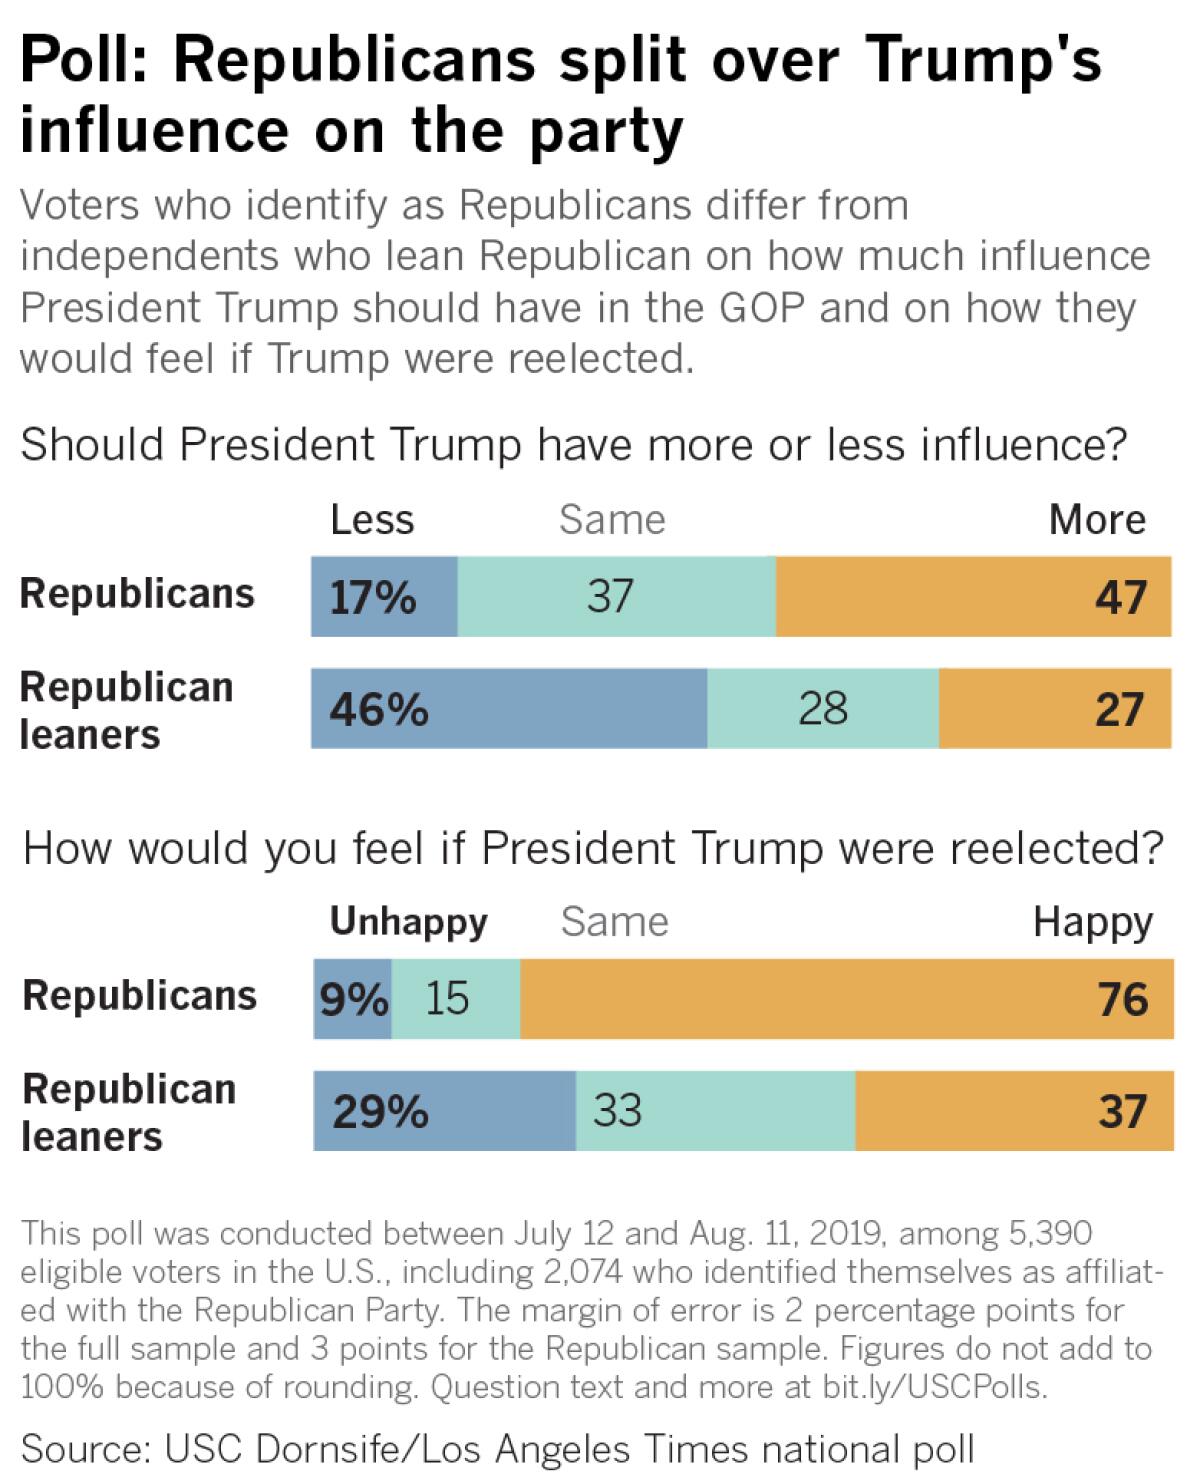 Voters who identify as Republicans differ from independents who lean Republican on how much influence President Trump should have in the GOP and on how they would feel if Trump were reelected.